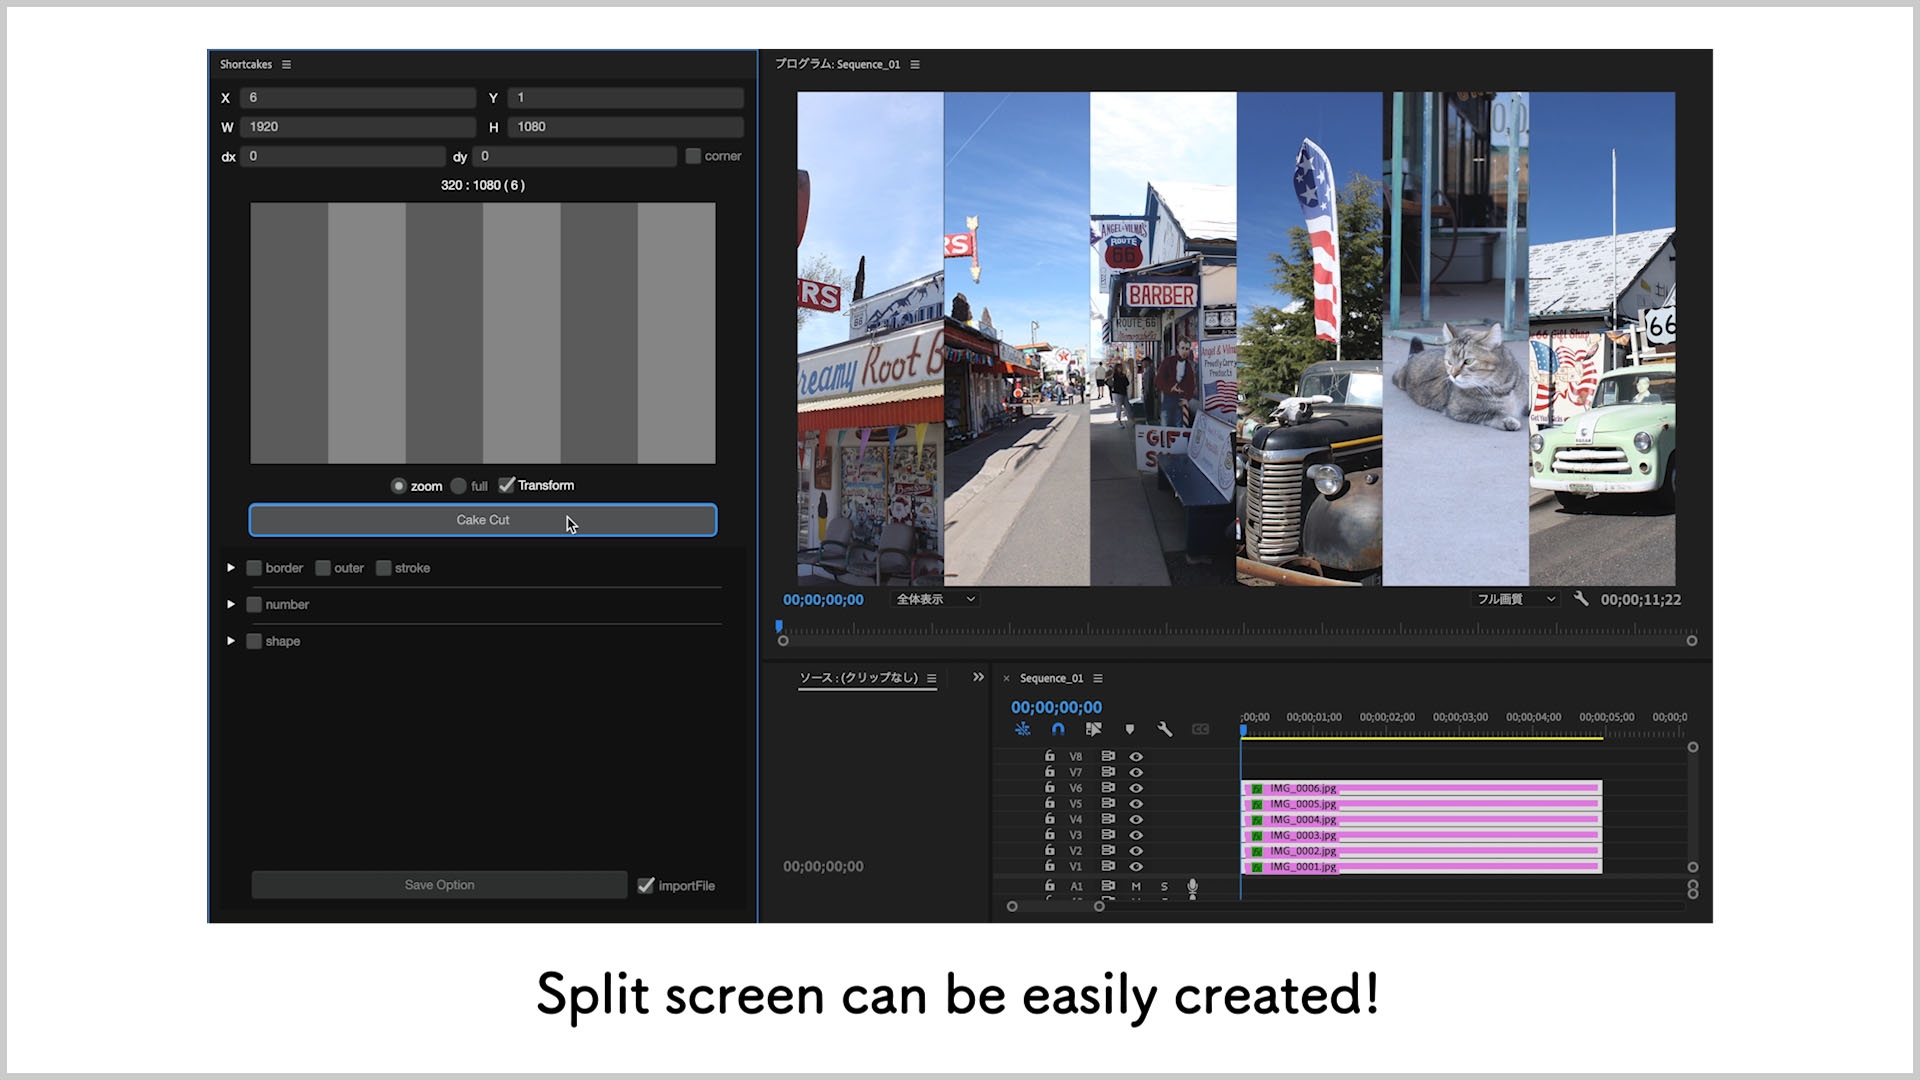 Split screen can be easily created!